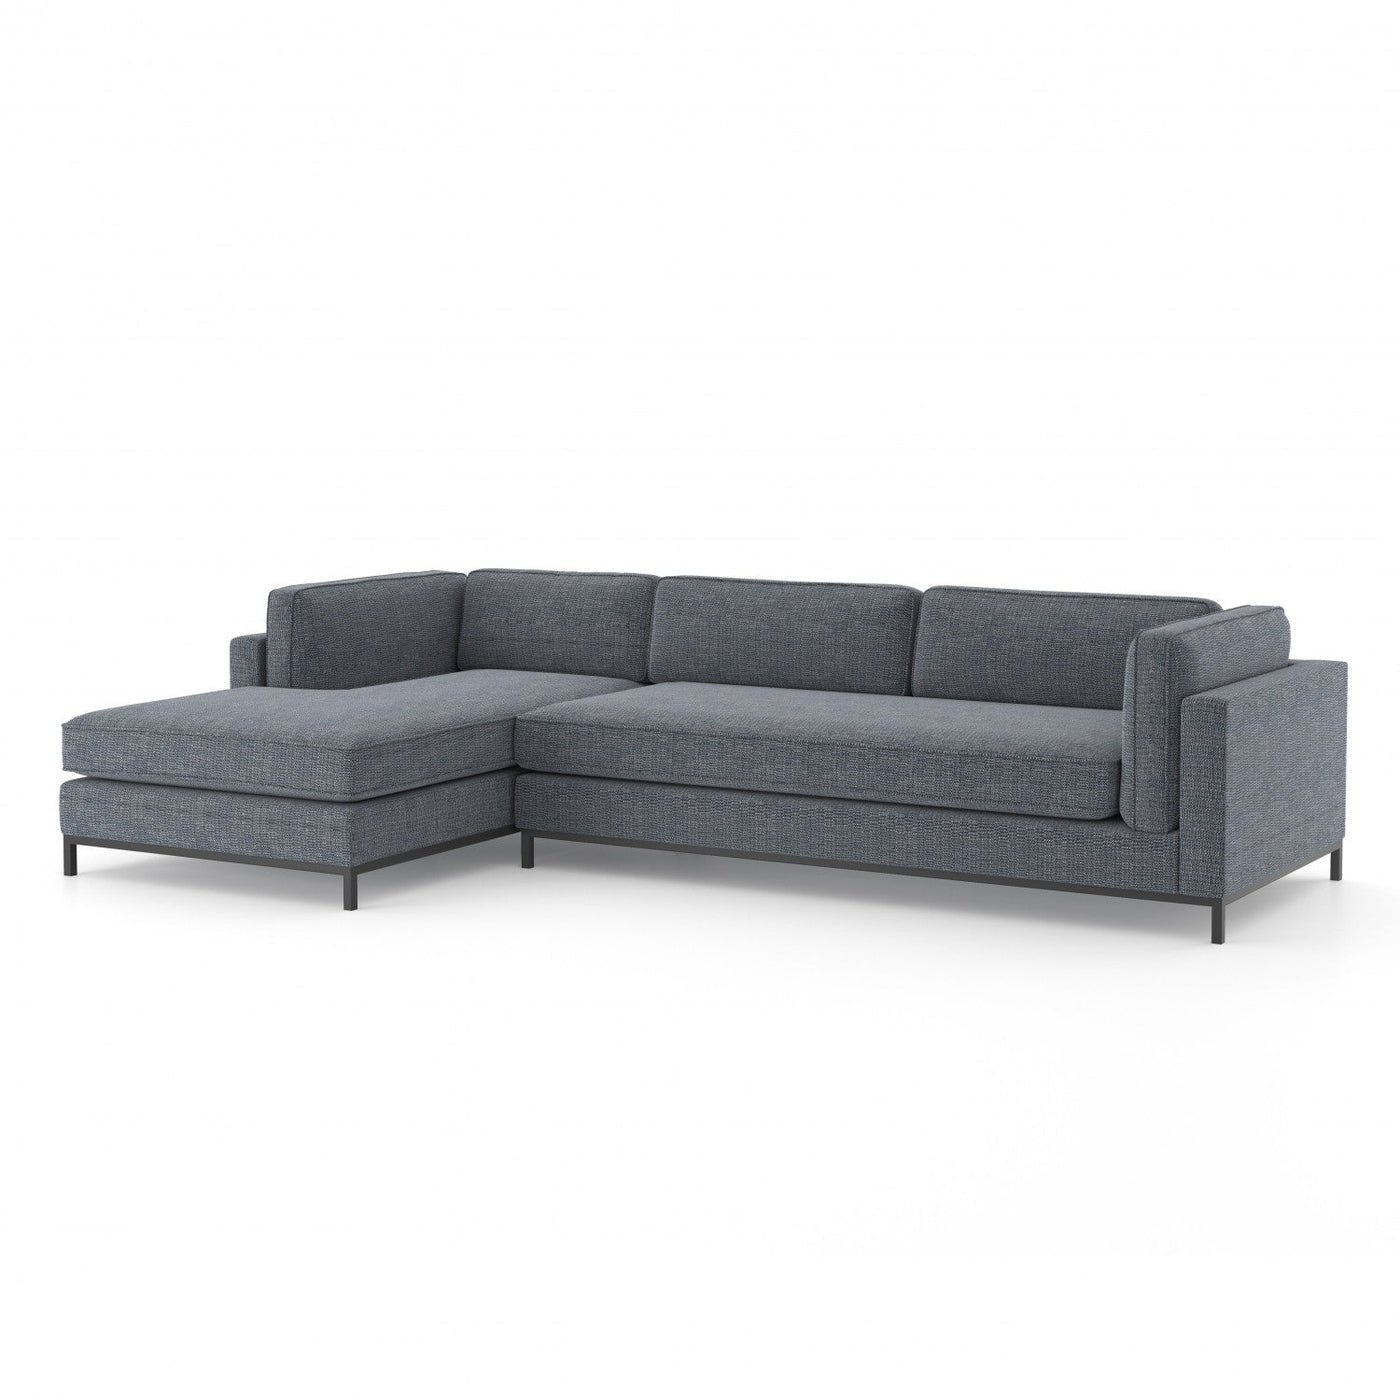 Grant Sectional Sofa with LEFT Chaise -Navy